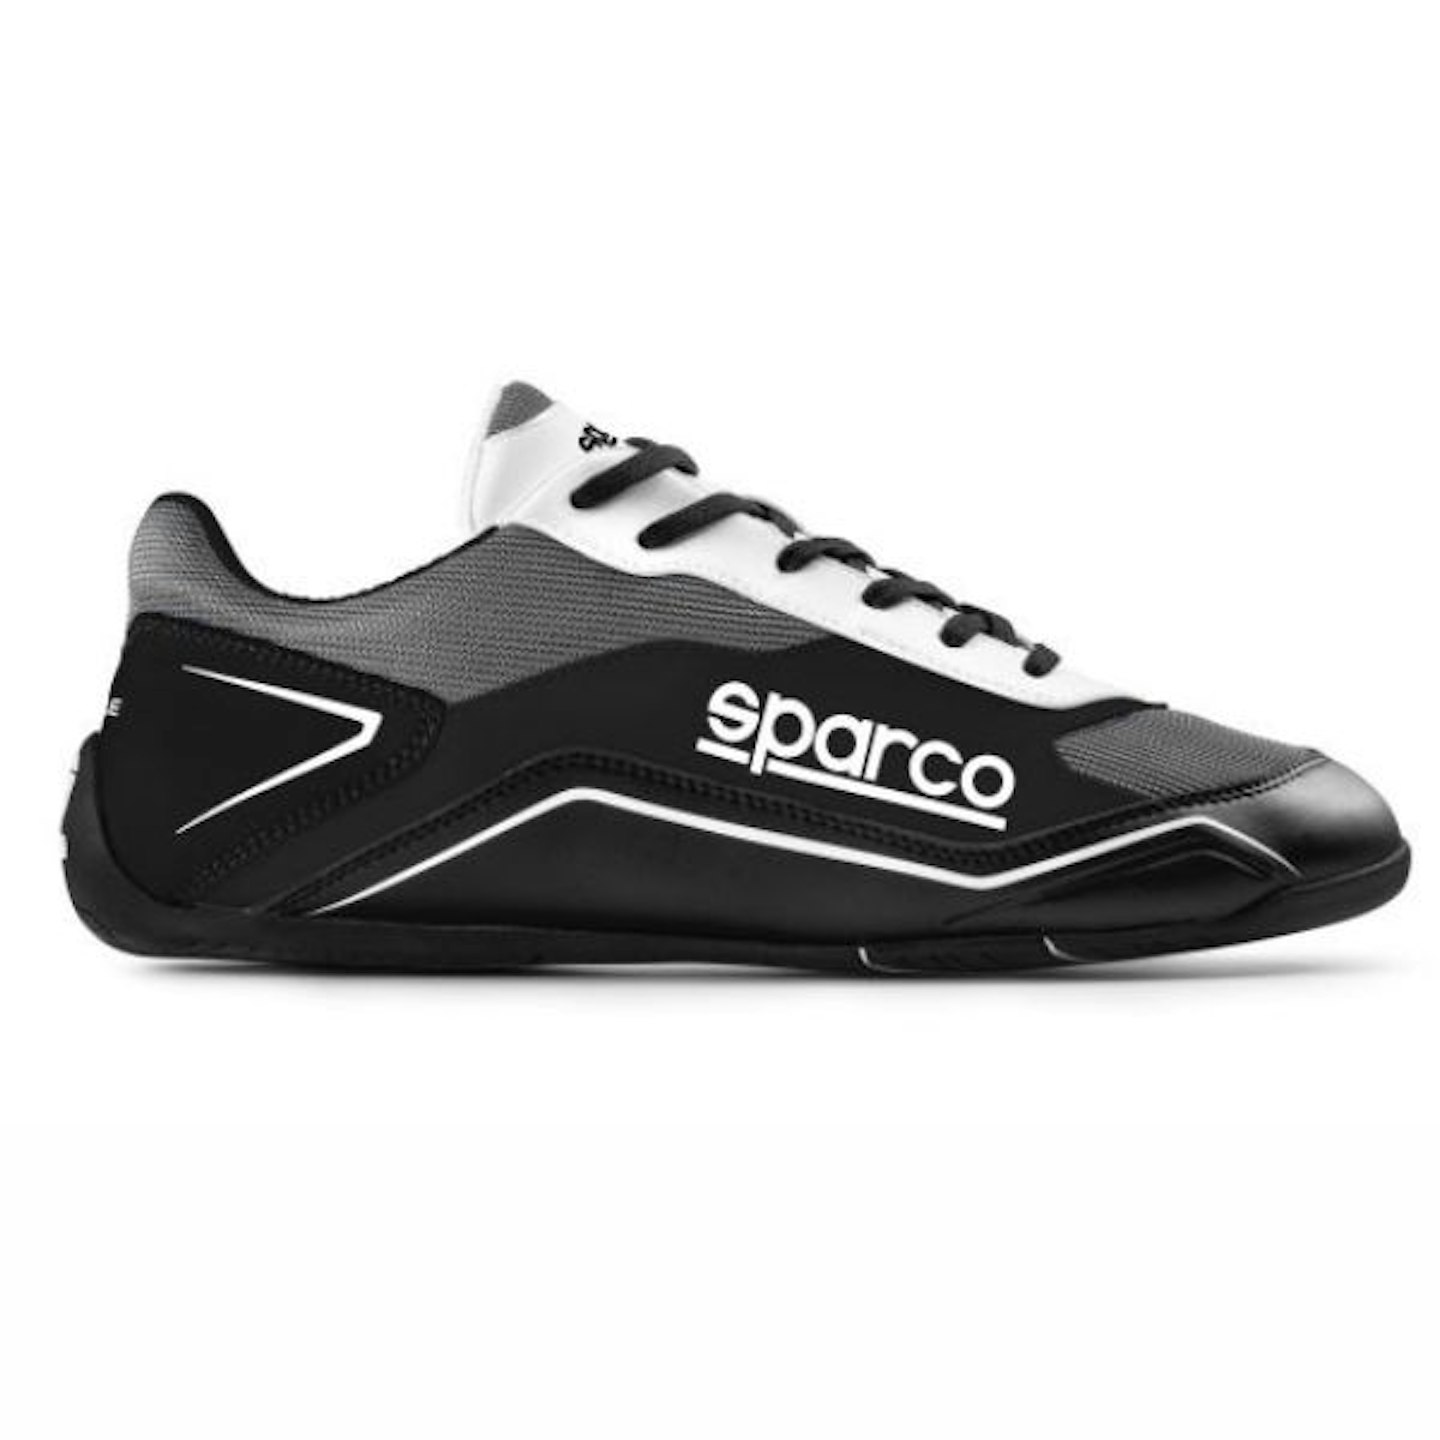 The best sim racing shoes